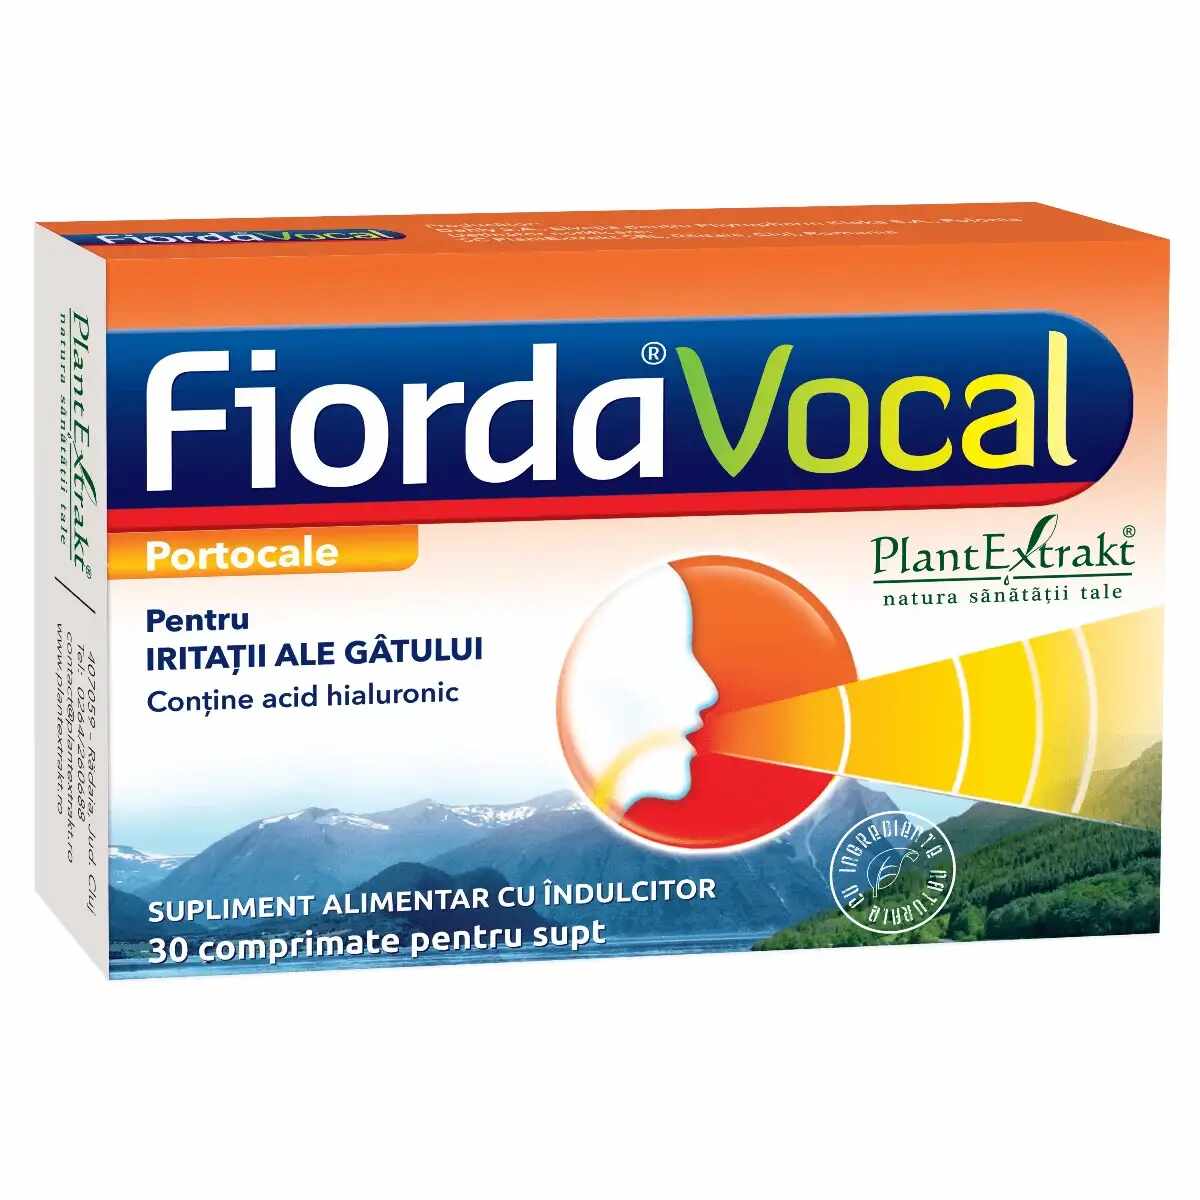 Fiorda Vocal Portocale x 30cpr, Plant Extract